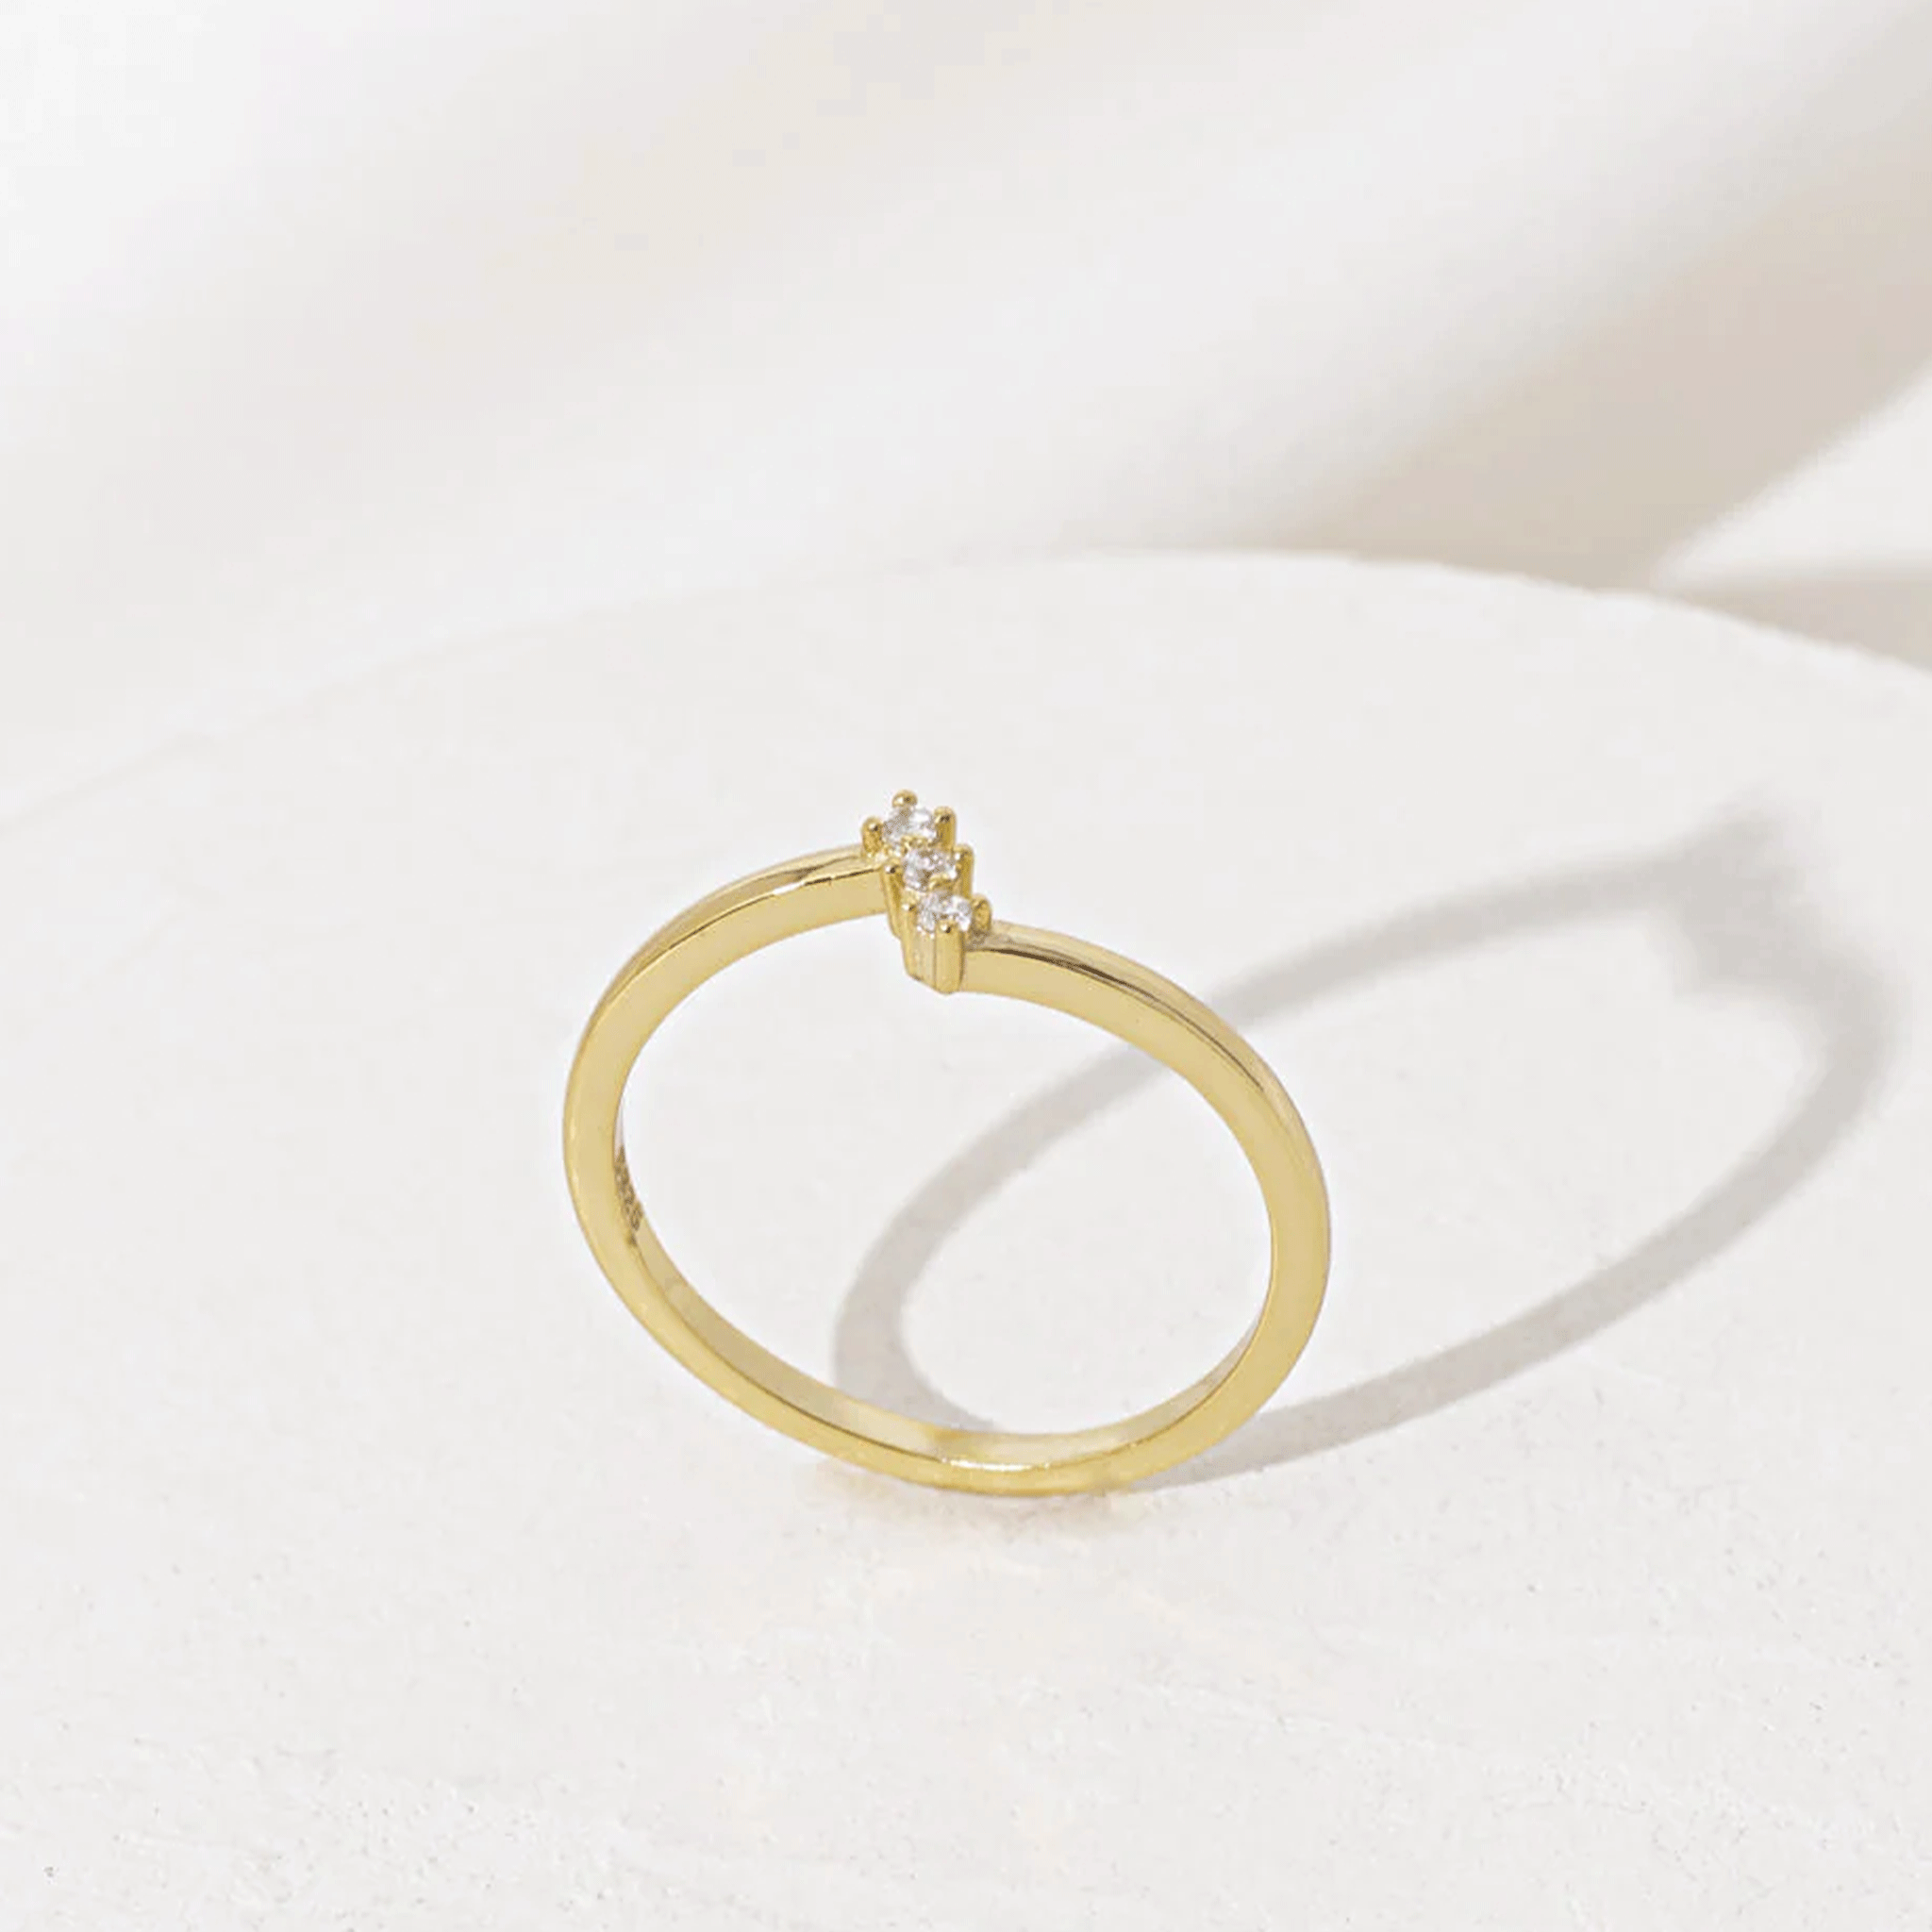 The Imagine Ring that is a thin gold band with three cubic zirconia stones stacked on top of one another.